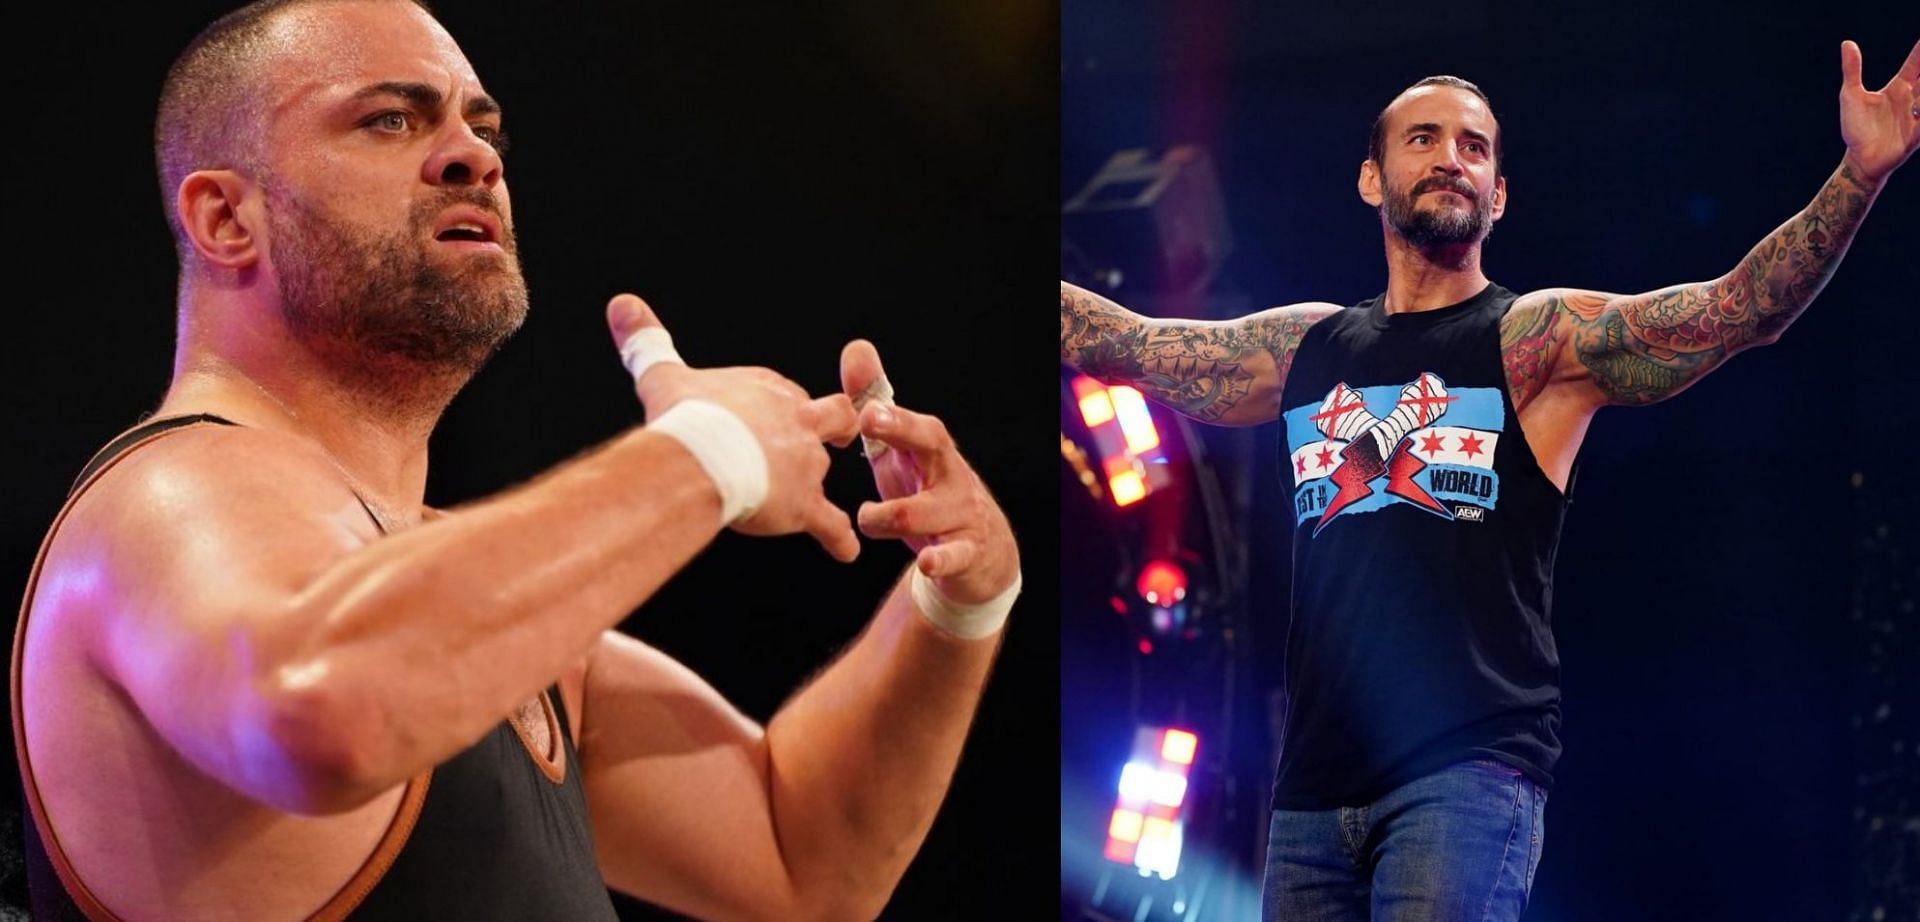 CM Punk and Eddie Kingston will meet each other in the Arena at Full Gear!